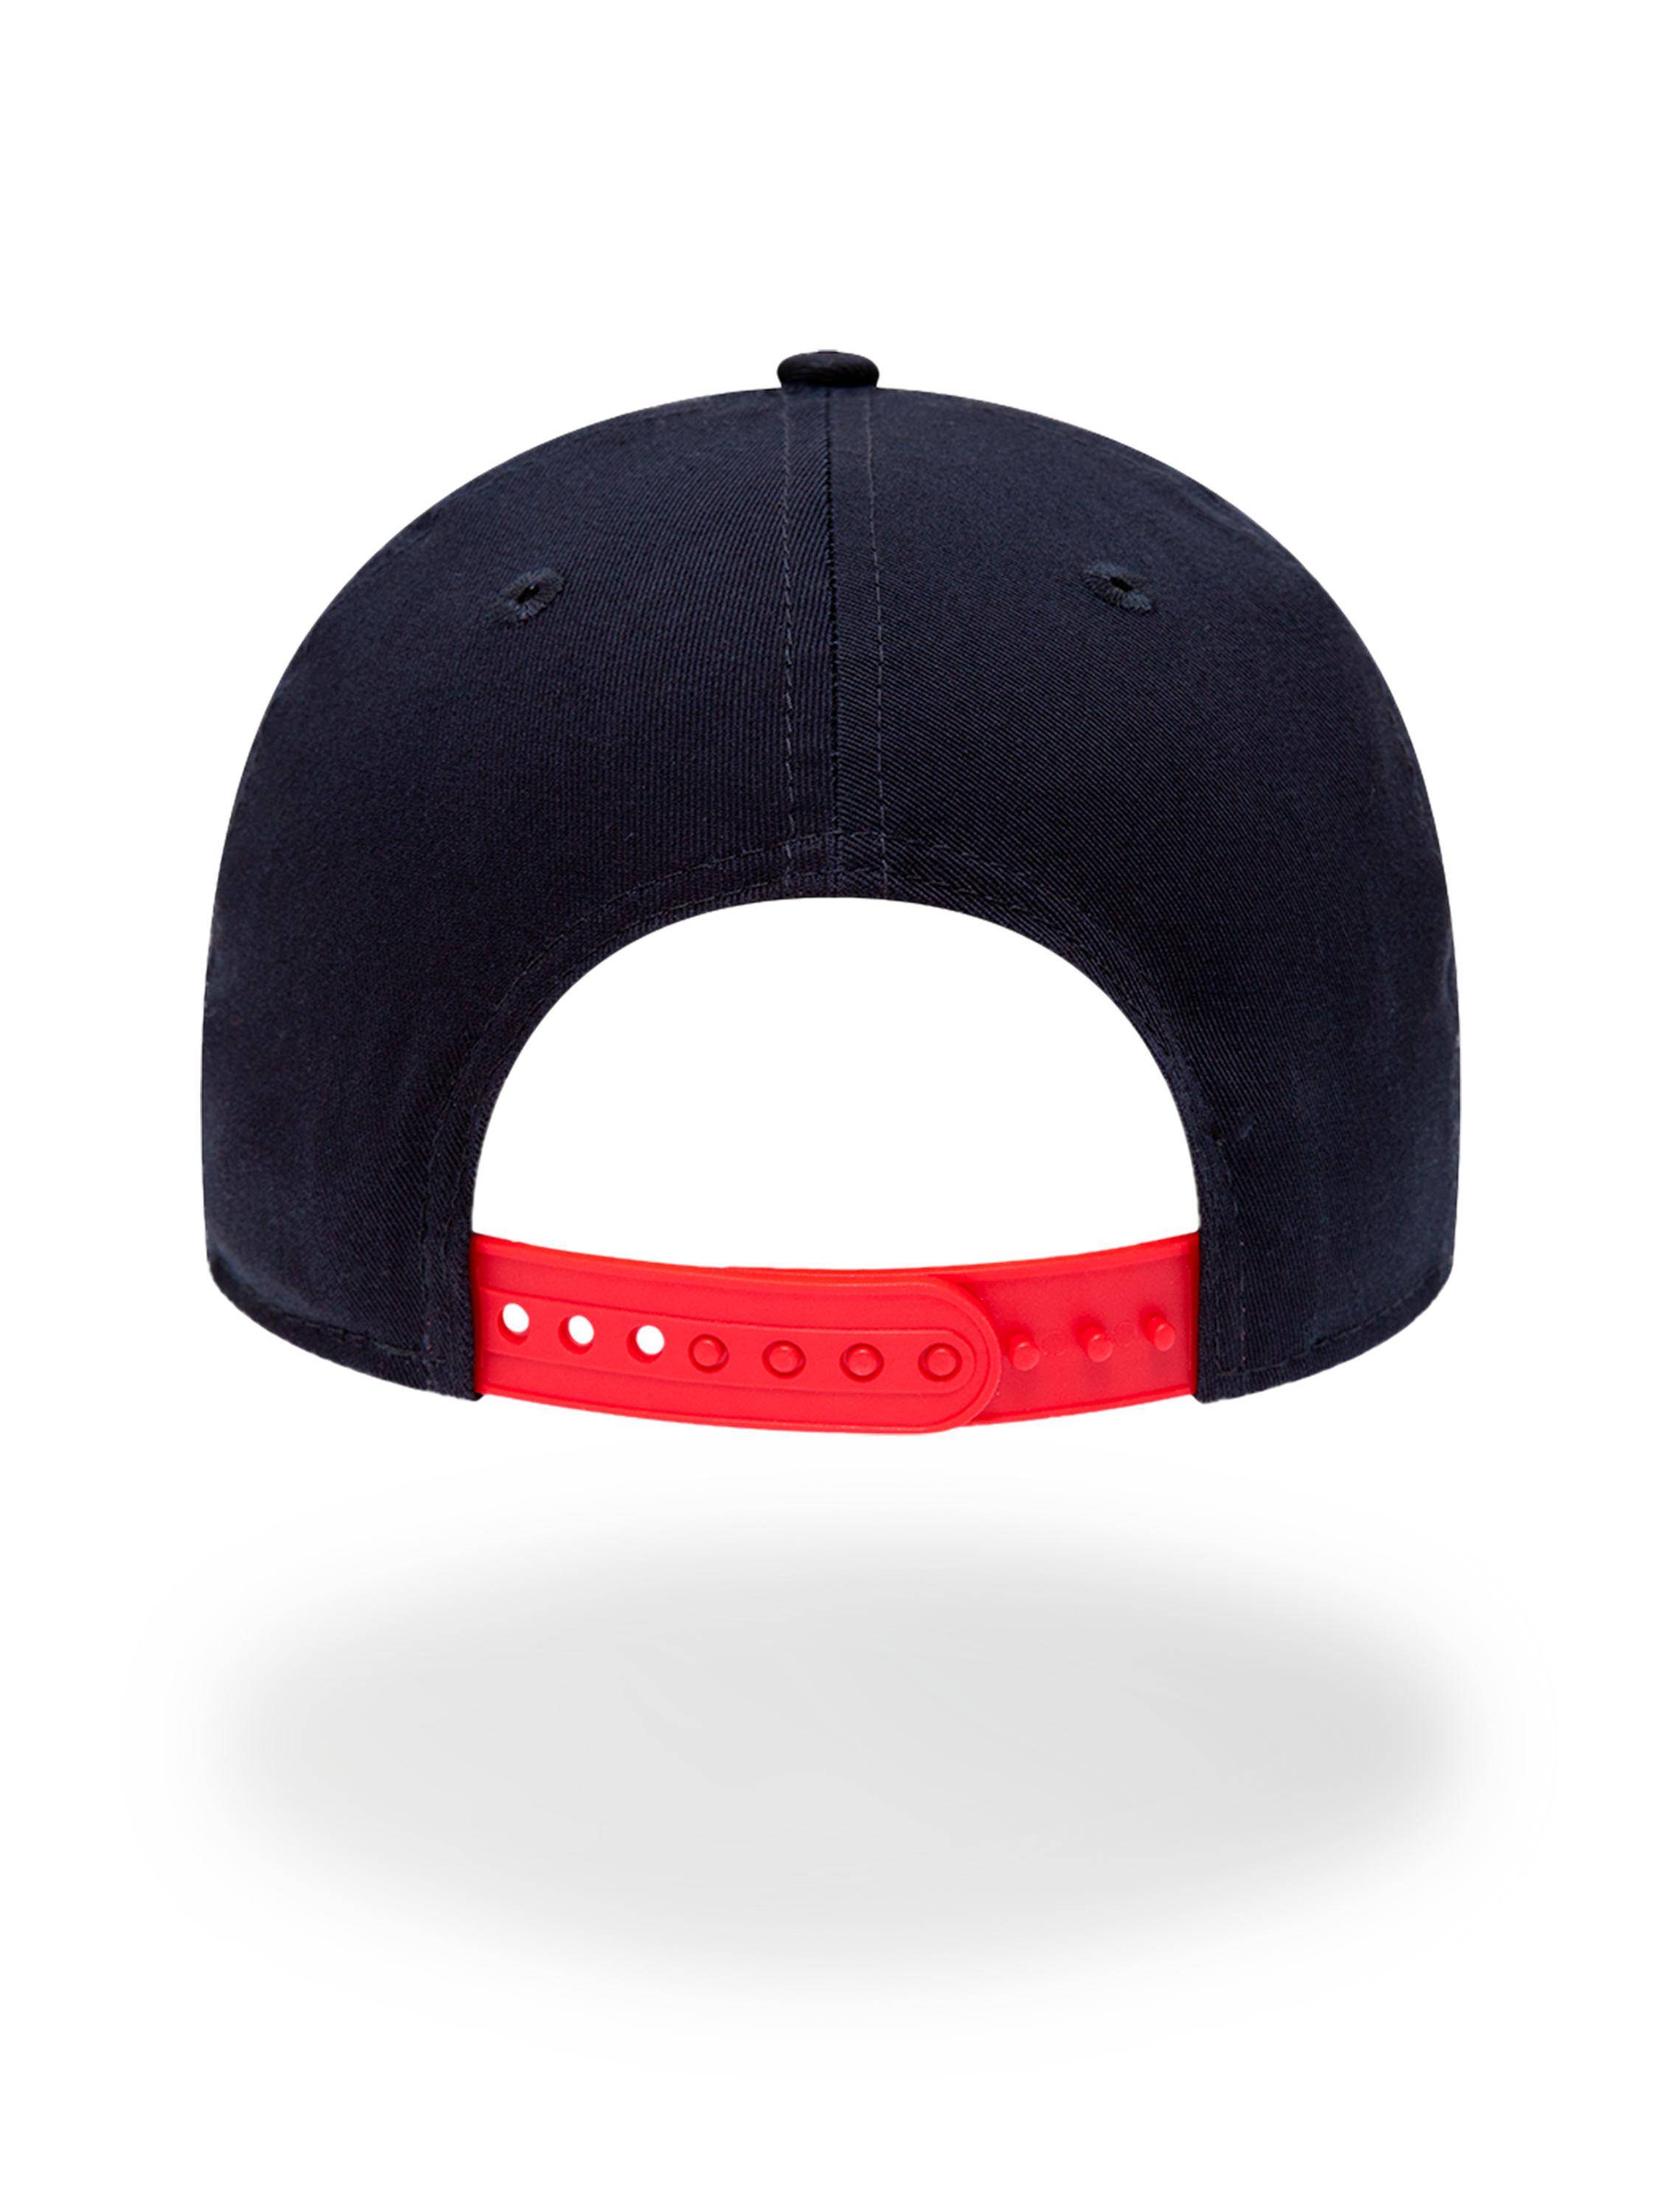 Casquette Oracle Red Bull Racing F1™ NEW ERA 9Forty Essential 2023 - H –  FANABOX™